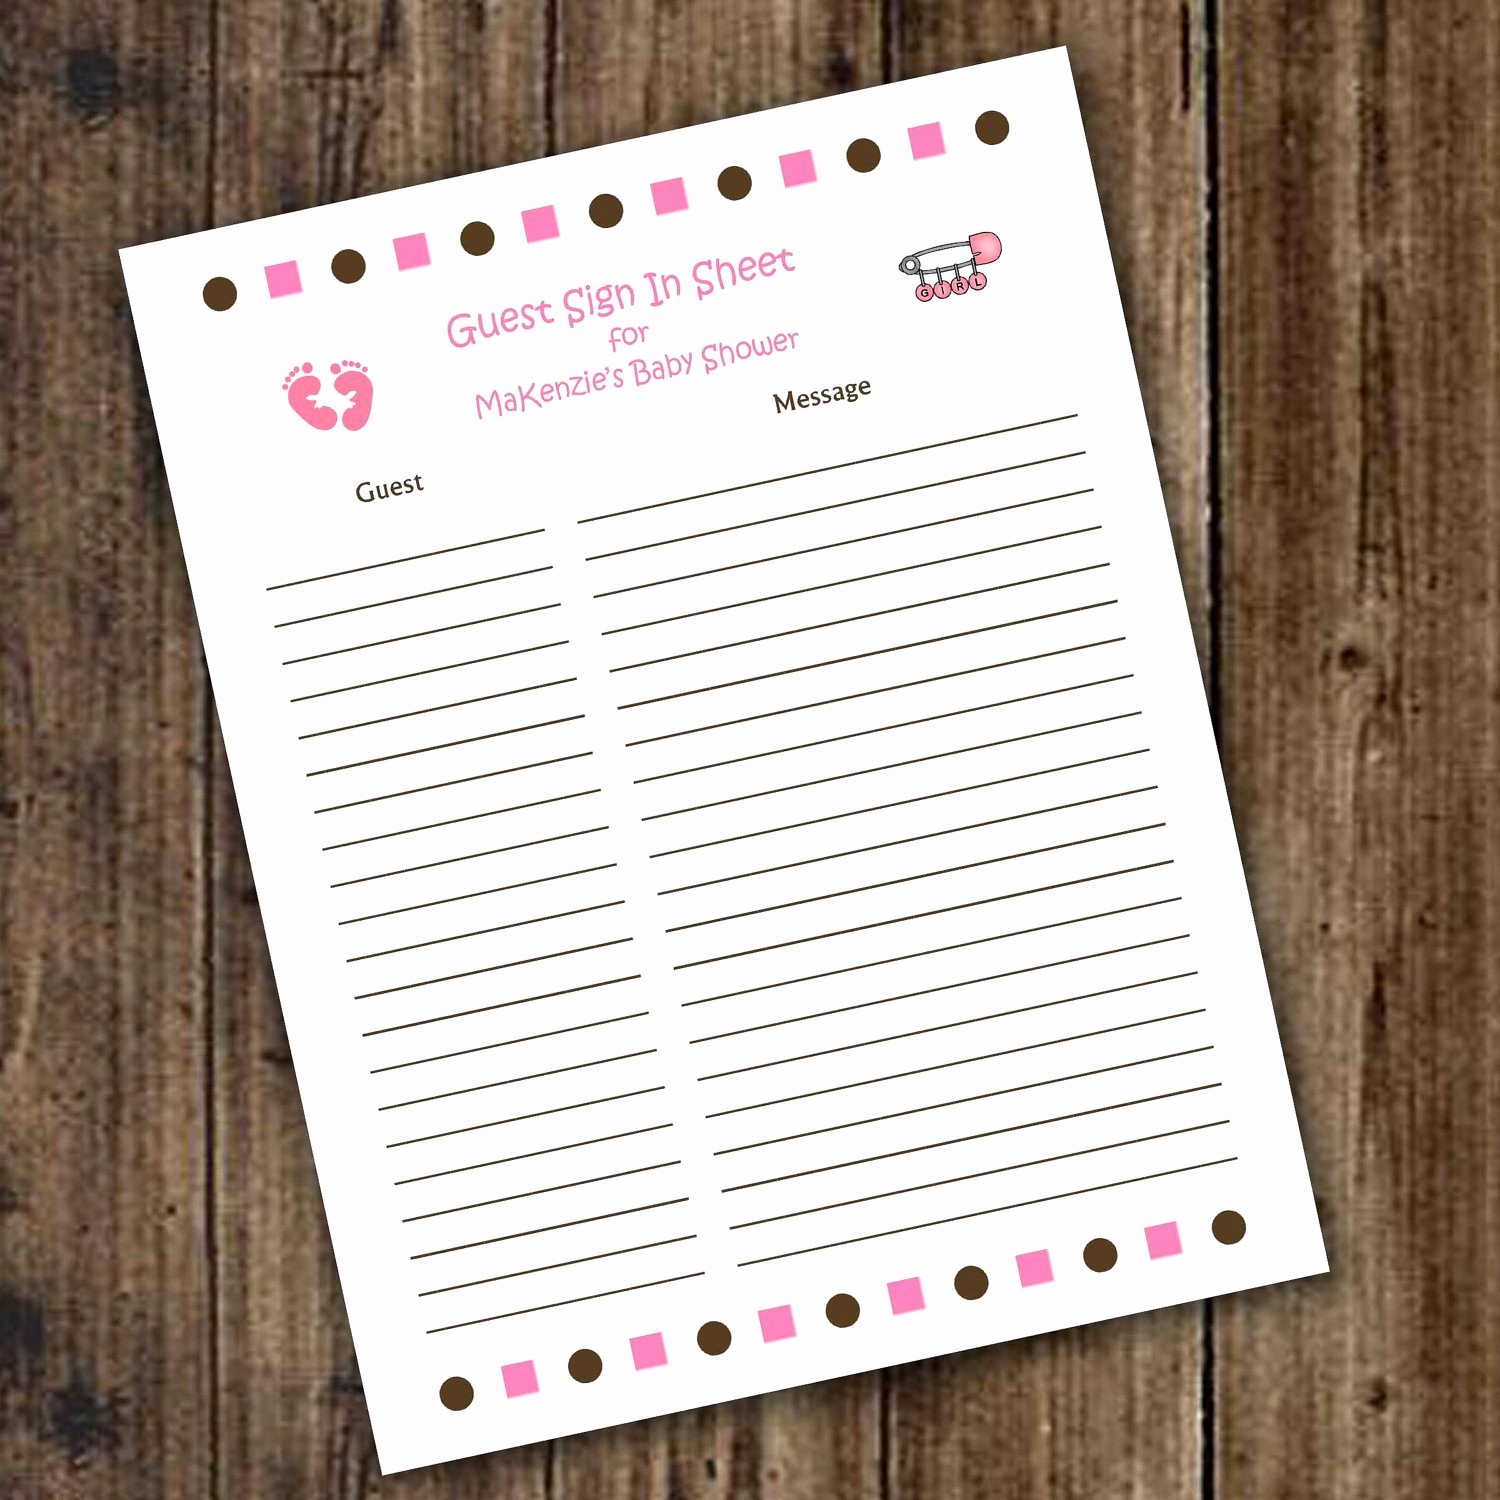 Bridal Shower Gift List Sheet Awesome Items Similar to Baby Shower Guest Sign In and Baby Advice